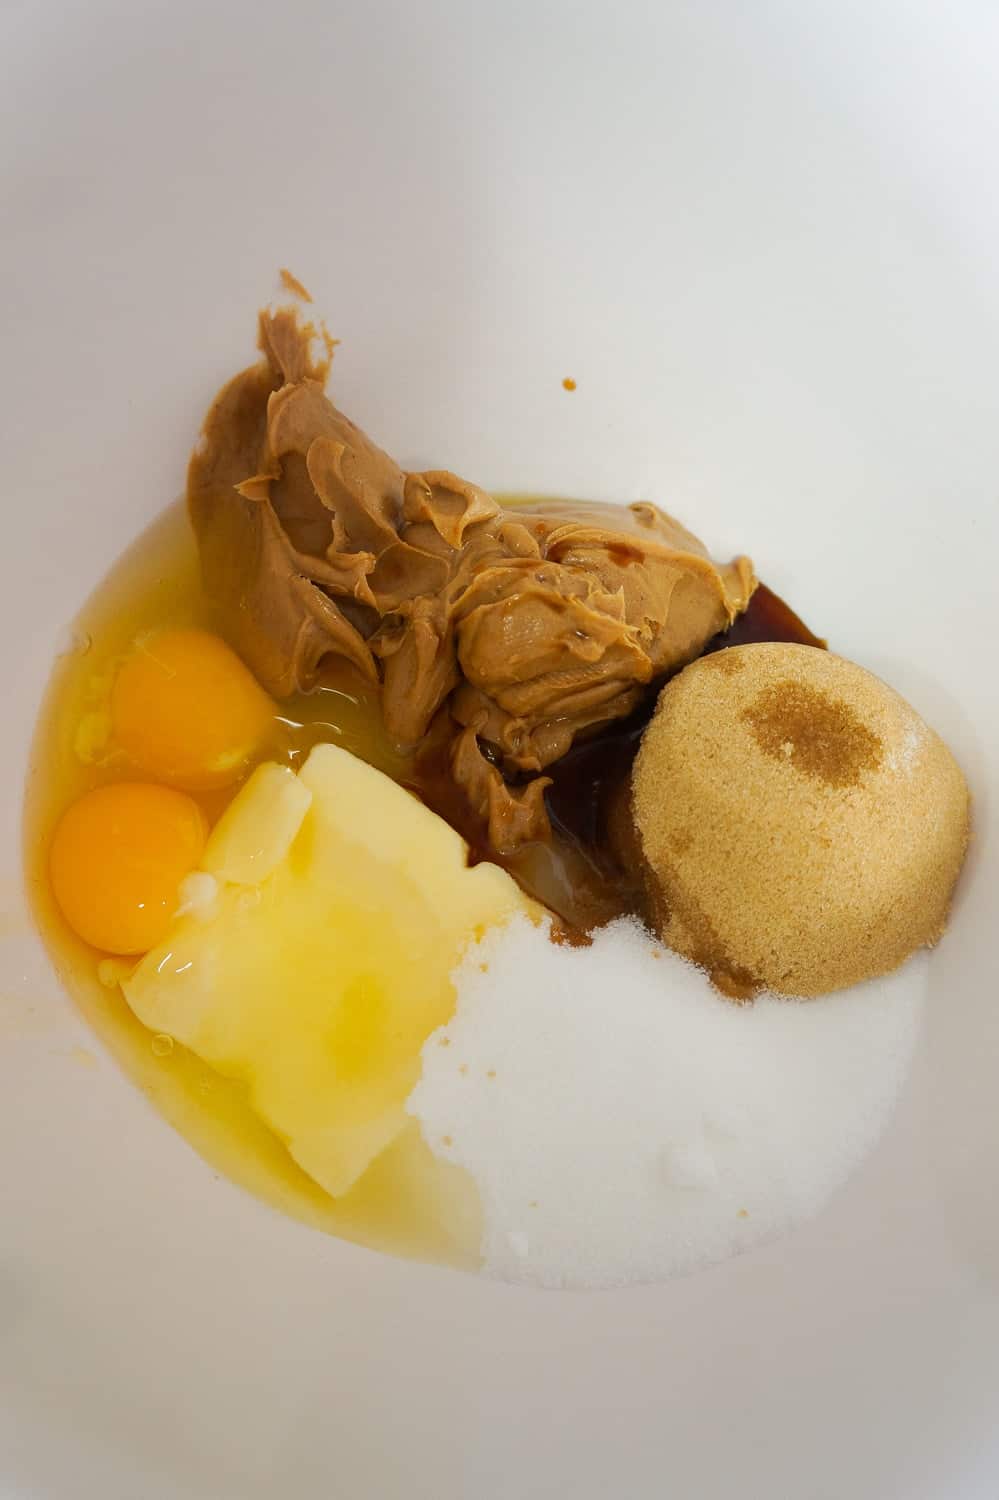 eggs, butter, peanut butter, white sugar and brown sugar in a mixing bowl